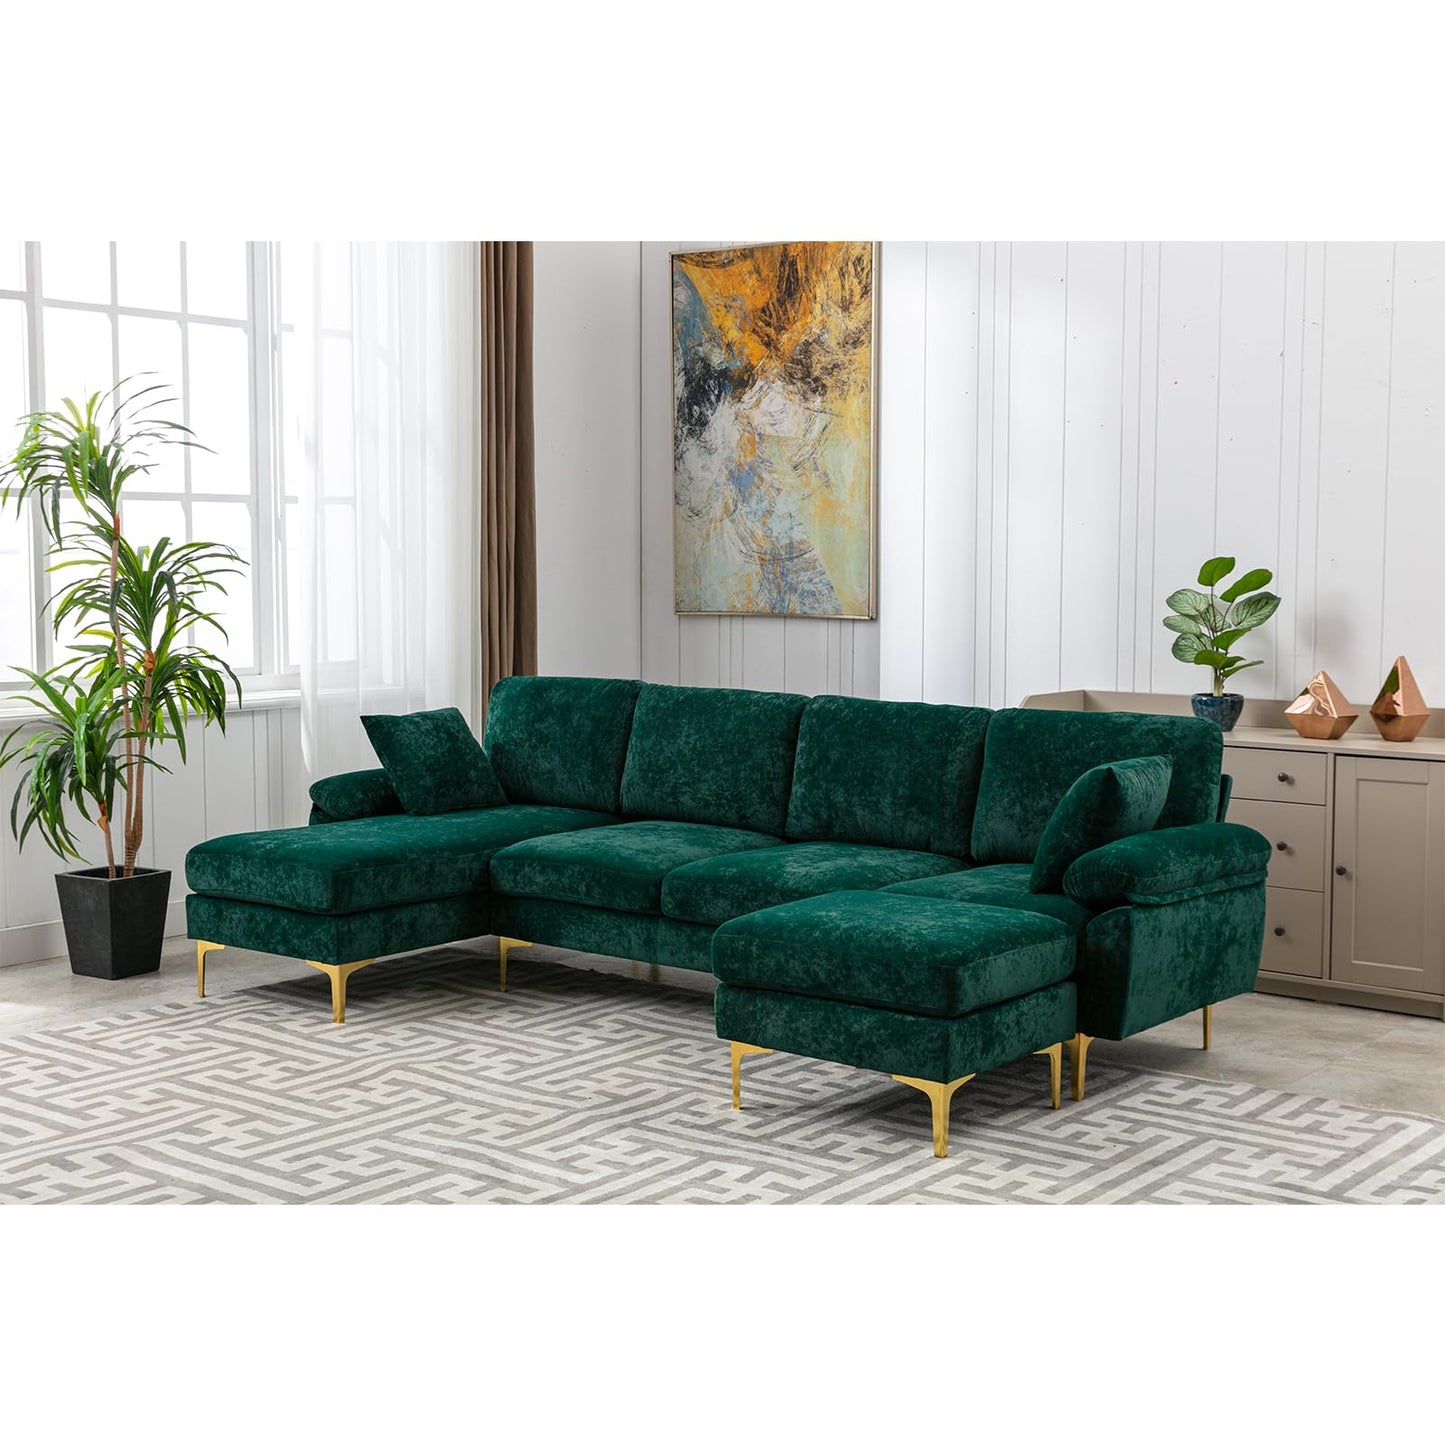 OUYESSIR U-Shaped Sectional Sofa Couch, 4 Seat Sofa Set for Living Room, Convertible L-Shaped Velvet Couch Set with Reversible Chaise Lounge, Ottoman and Pillows,114 inches (Emerald Green)